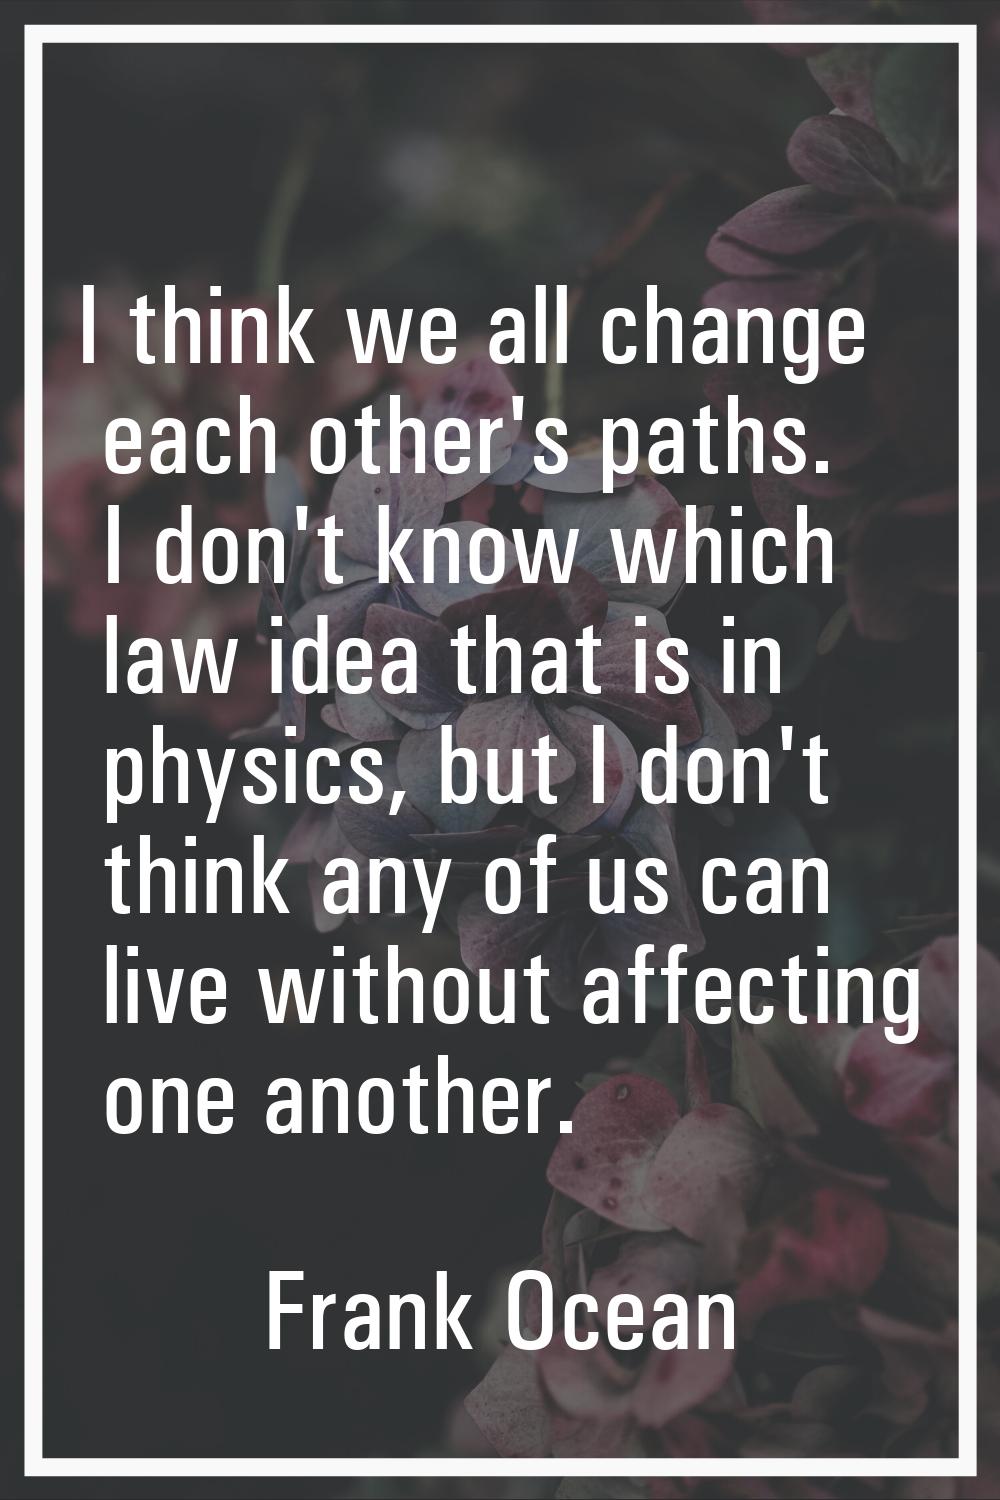 I think we all change each other's paths. I don't know which law idea that is in physics, but I don